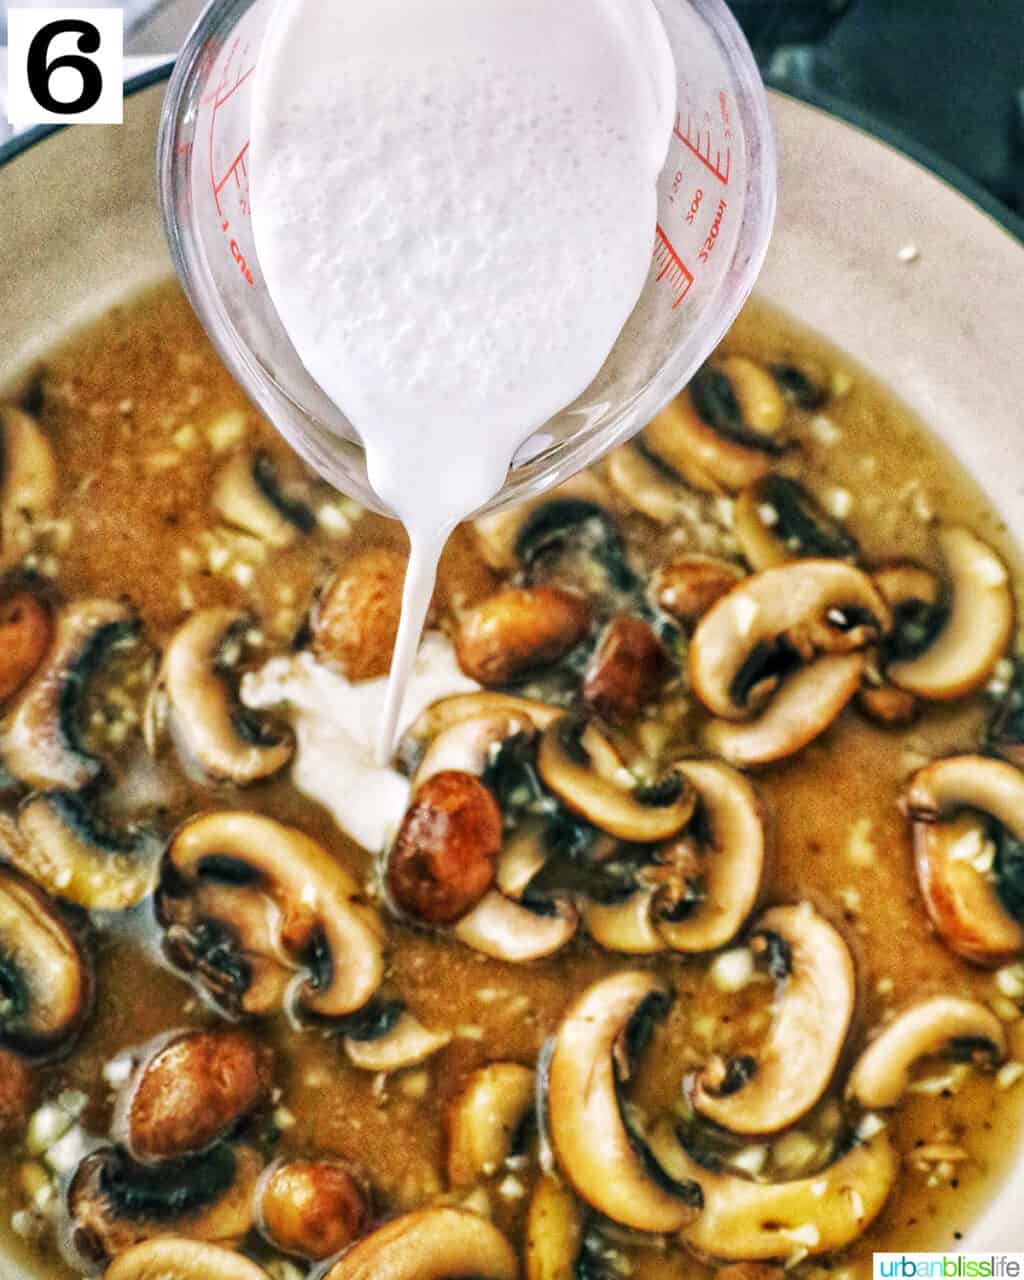 pouring cream over chopped mushrooms cooking in a pan.